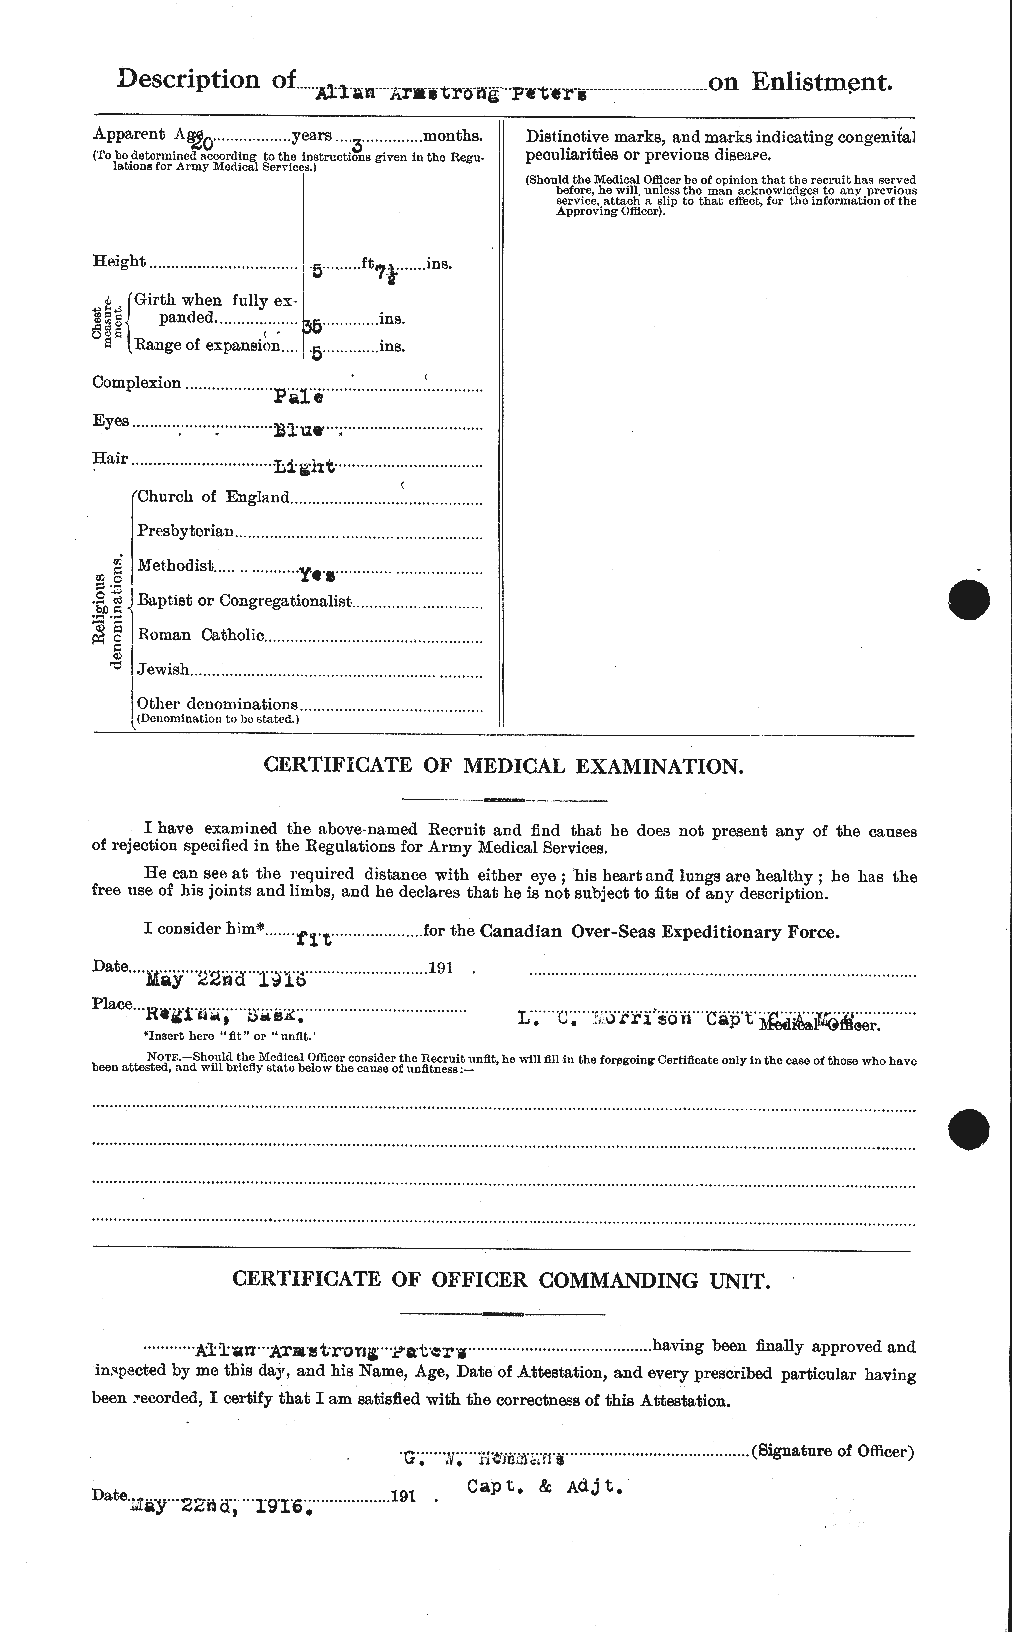 Personnel Records of the First World War - CEF 575342b